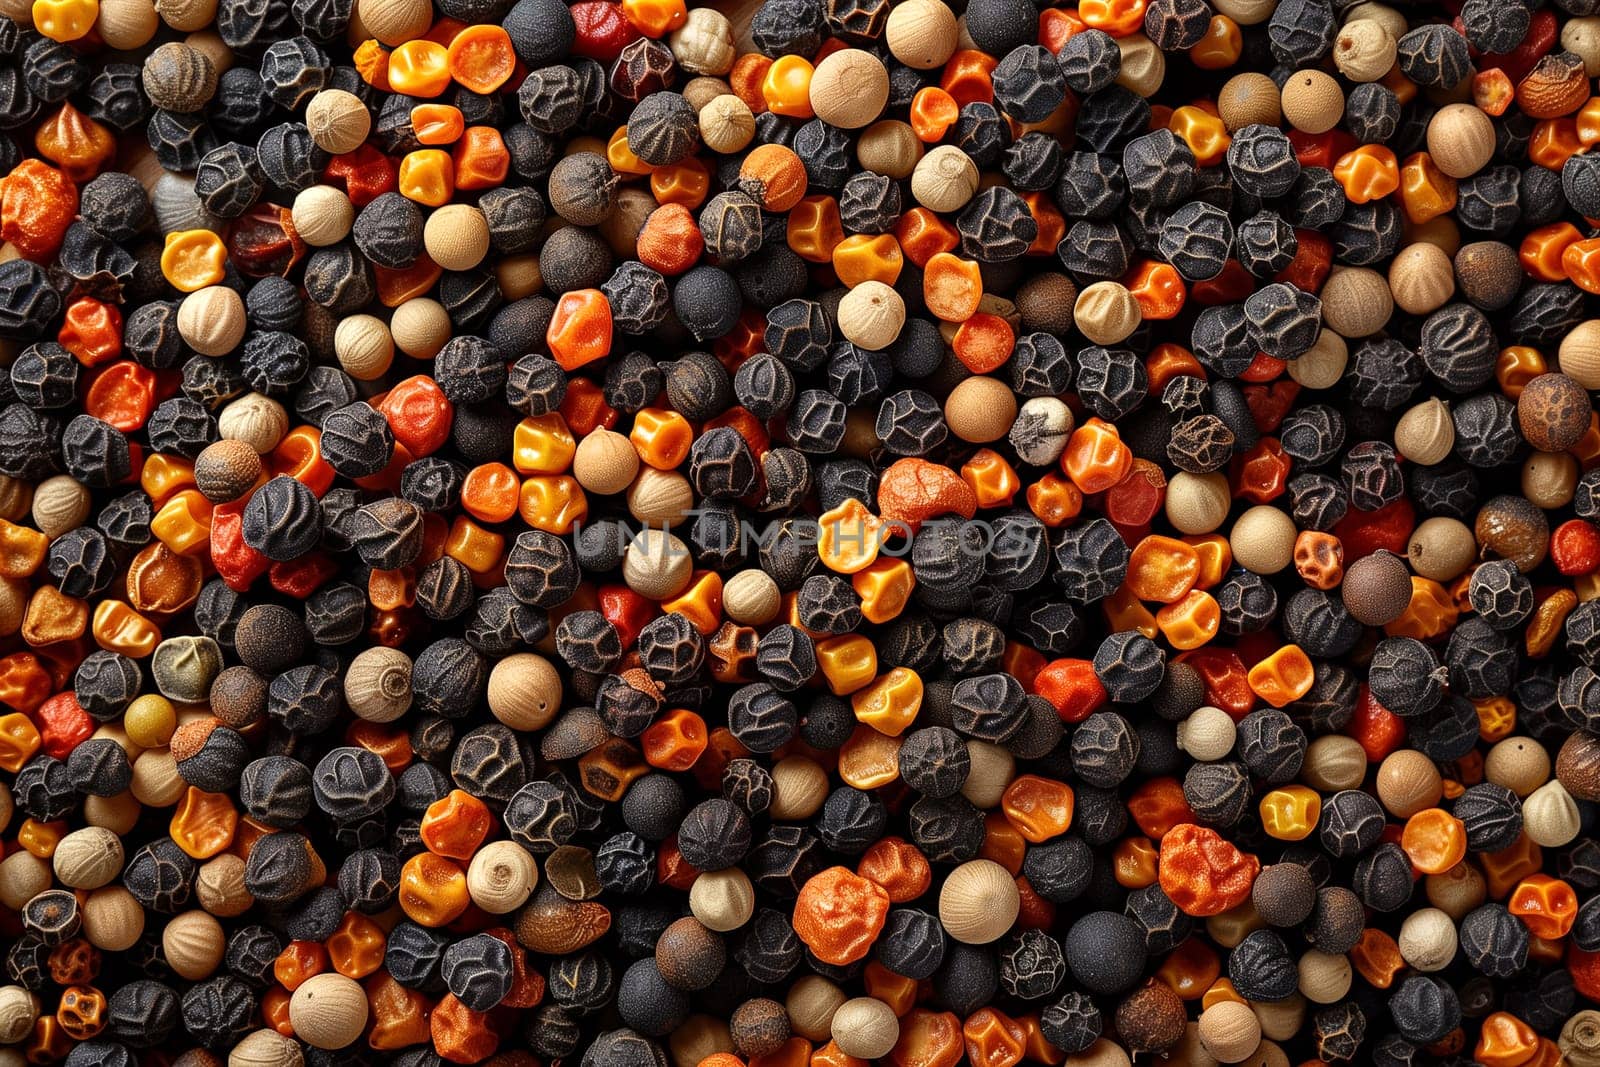 A variety of black, orange, and yellow peppercorns grouped together in a vibrant mix of colors.